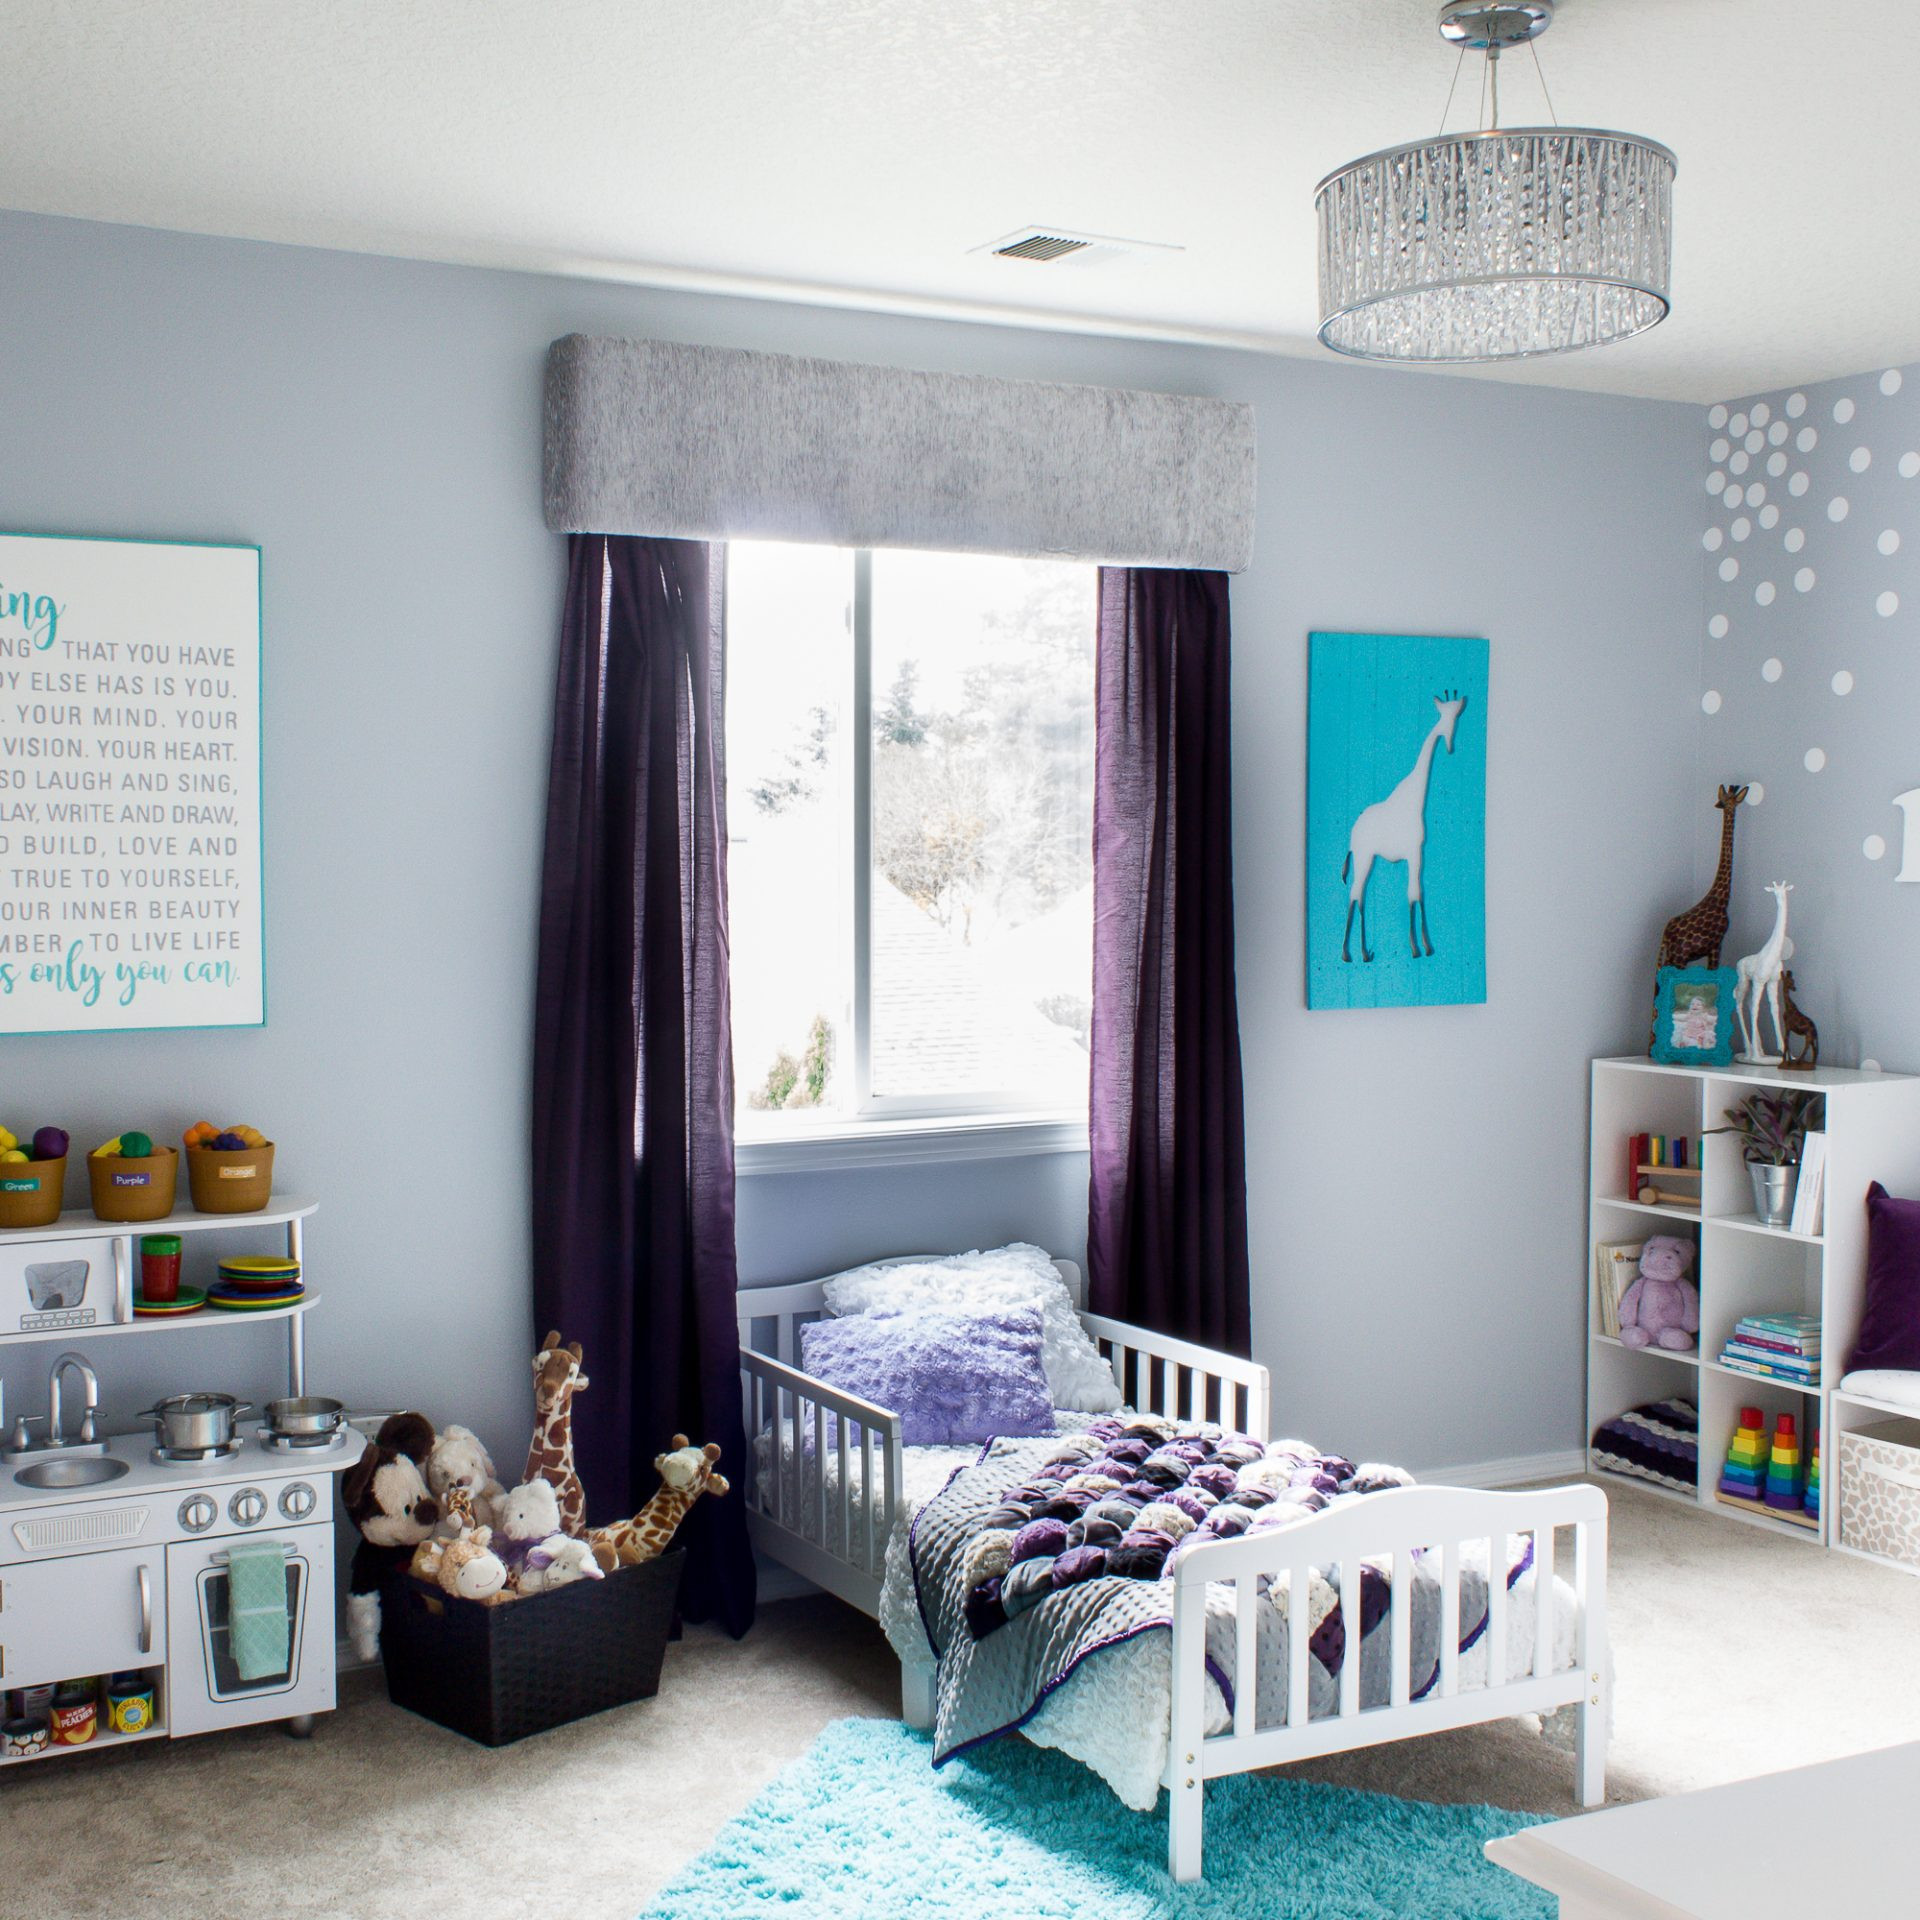 Toddlers Bedroom Ideas Girl
 Cute Toddler Girl Room Ideas with may DIY decor tutorials